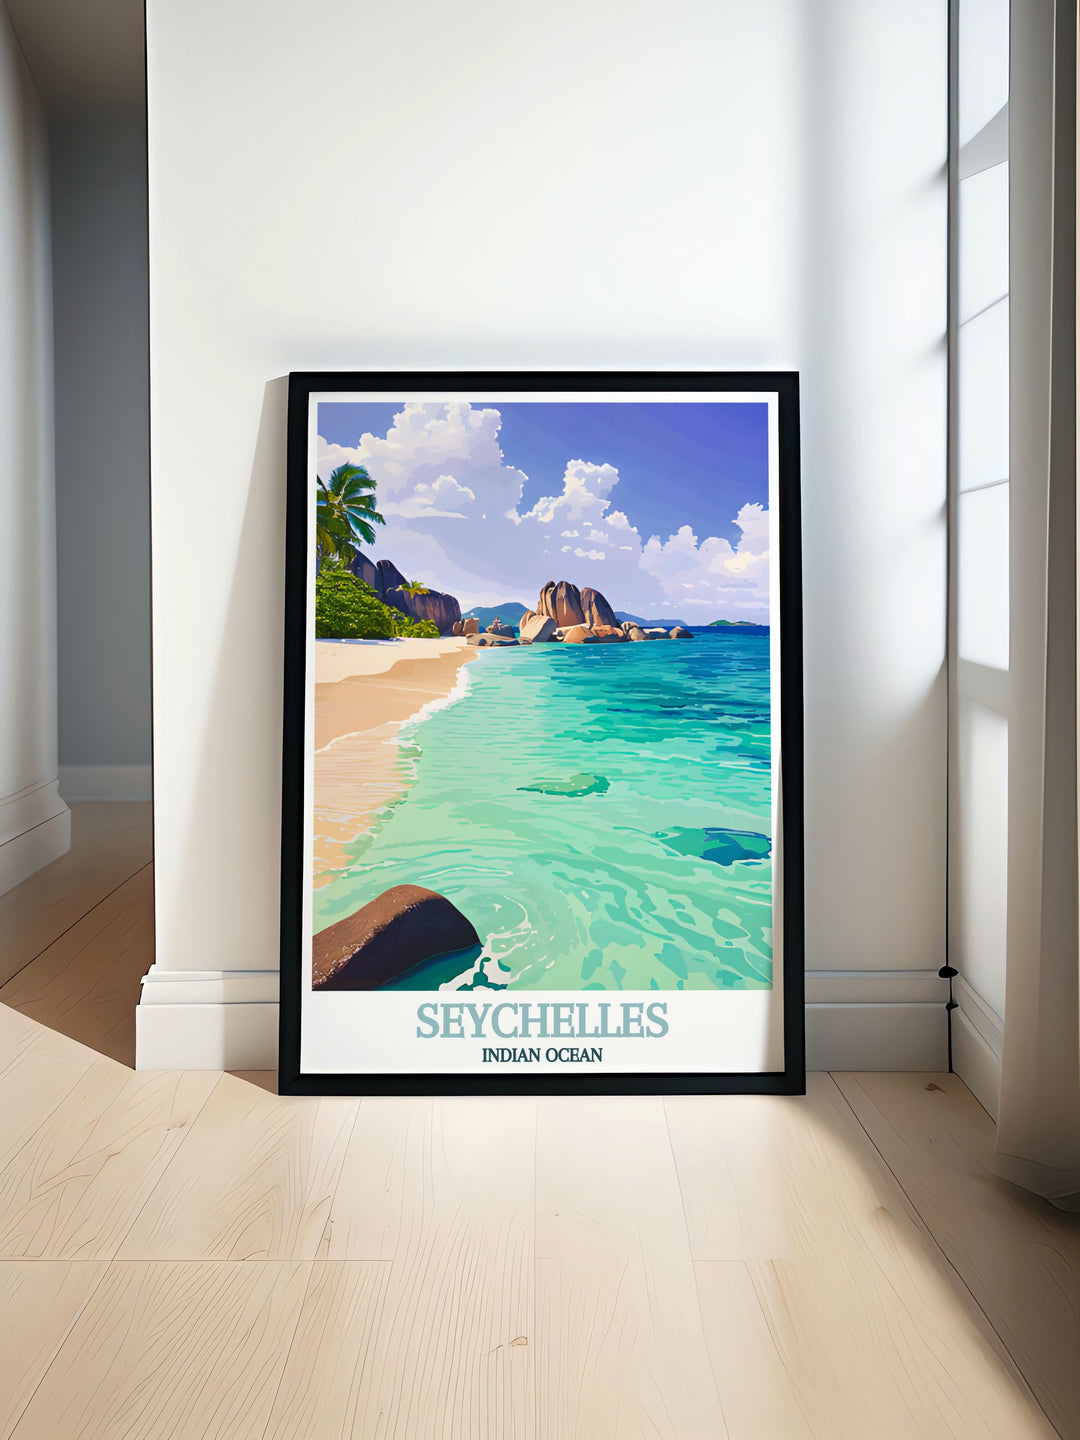 This poster of Anse Source dArgent and the Indian Ocean captures the stunning natural beauty and serene atmosphere of Seychelles, inviting viewers to explore this tropical gem.